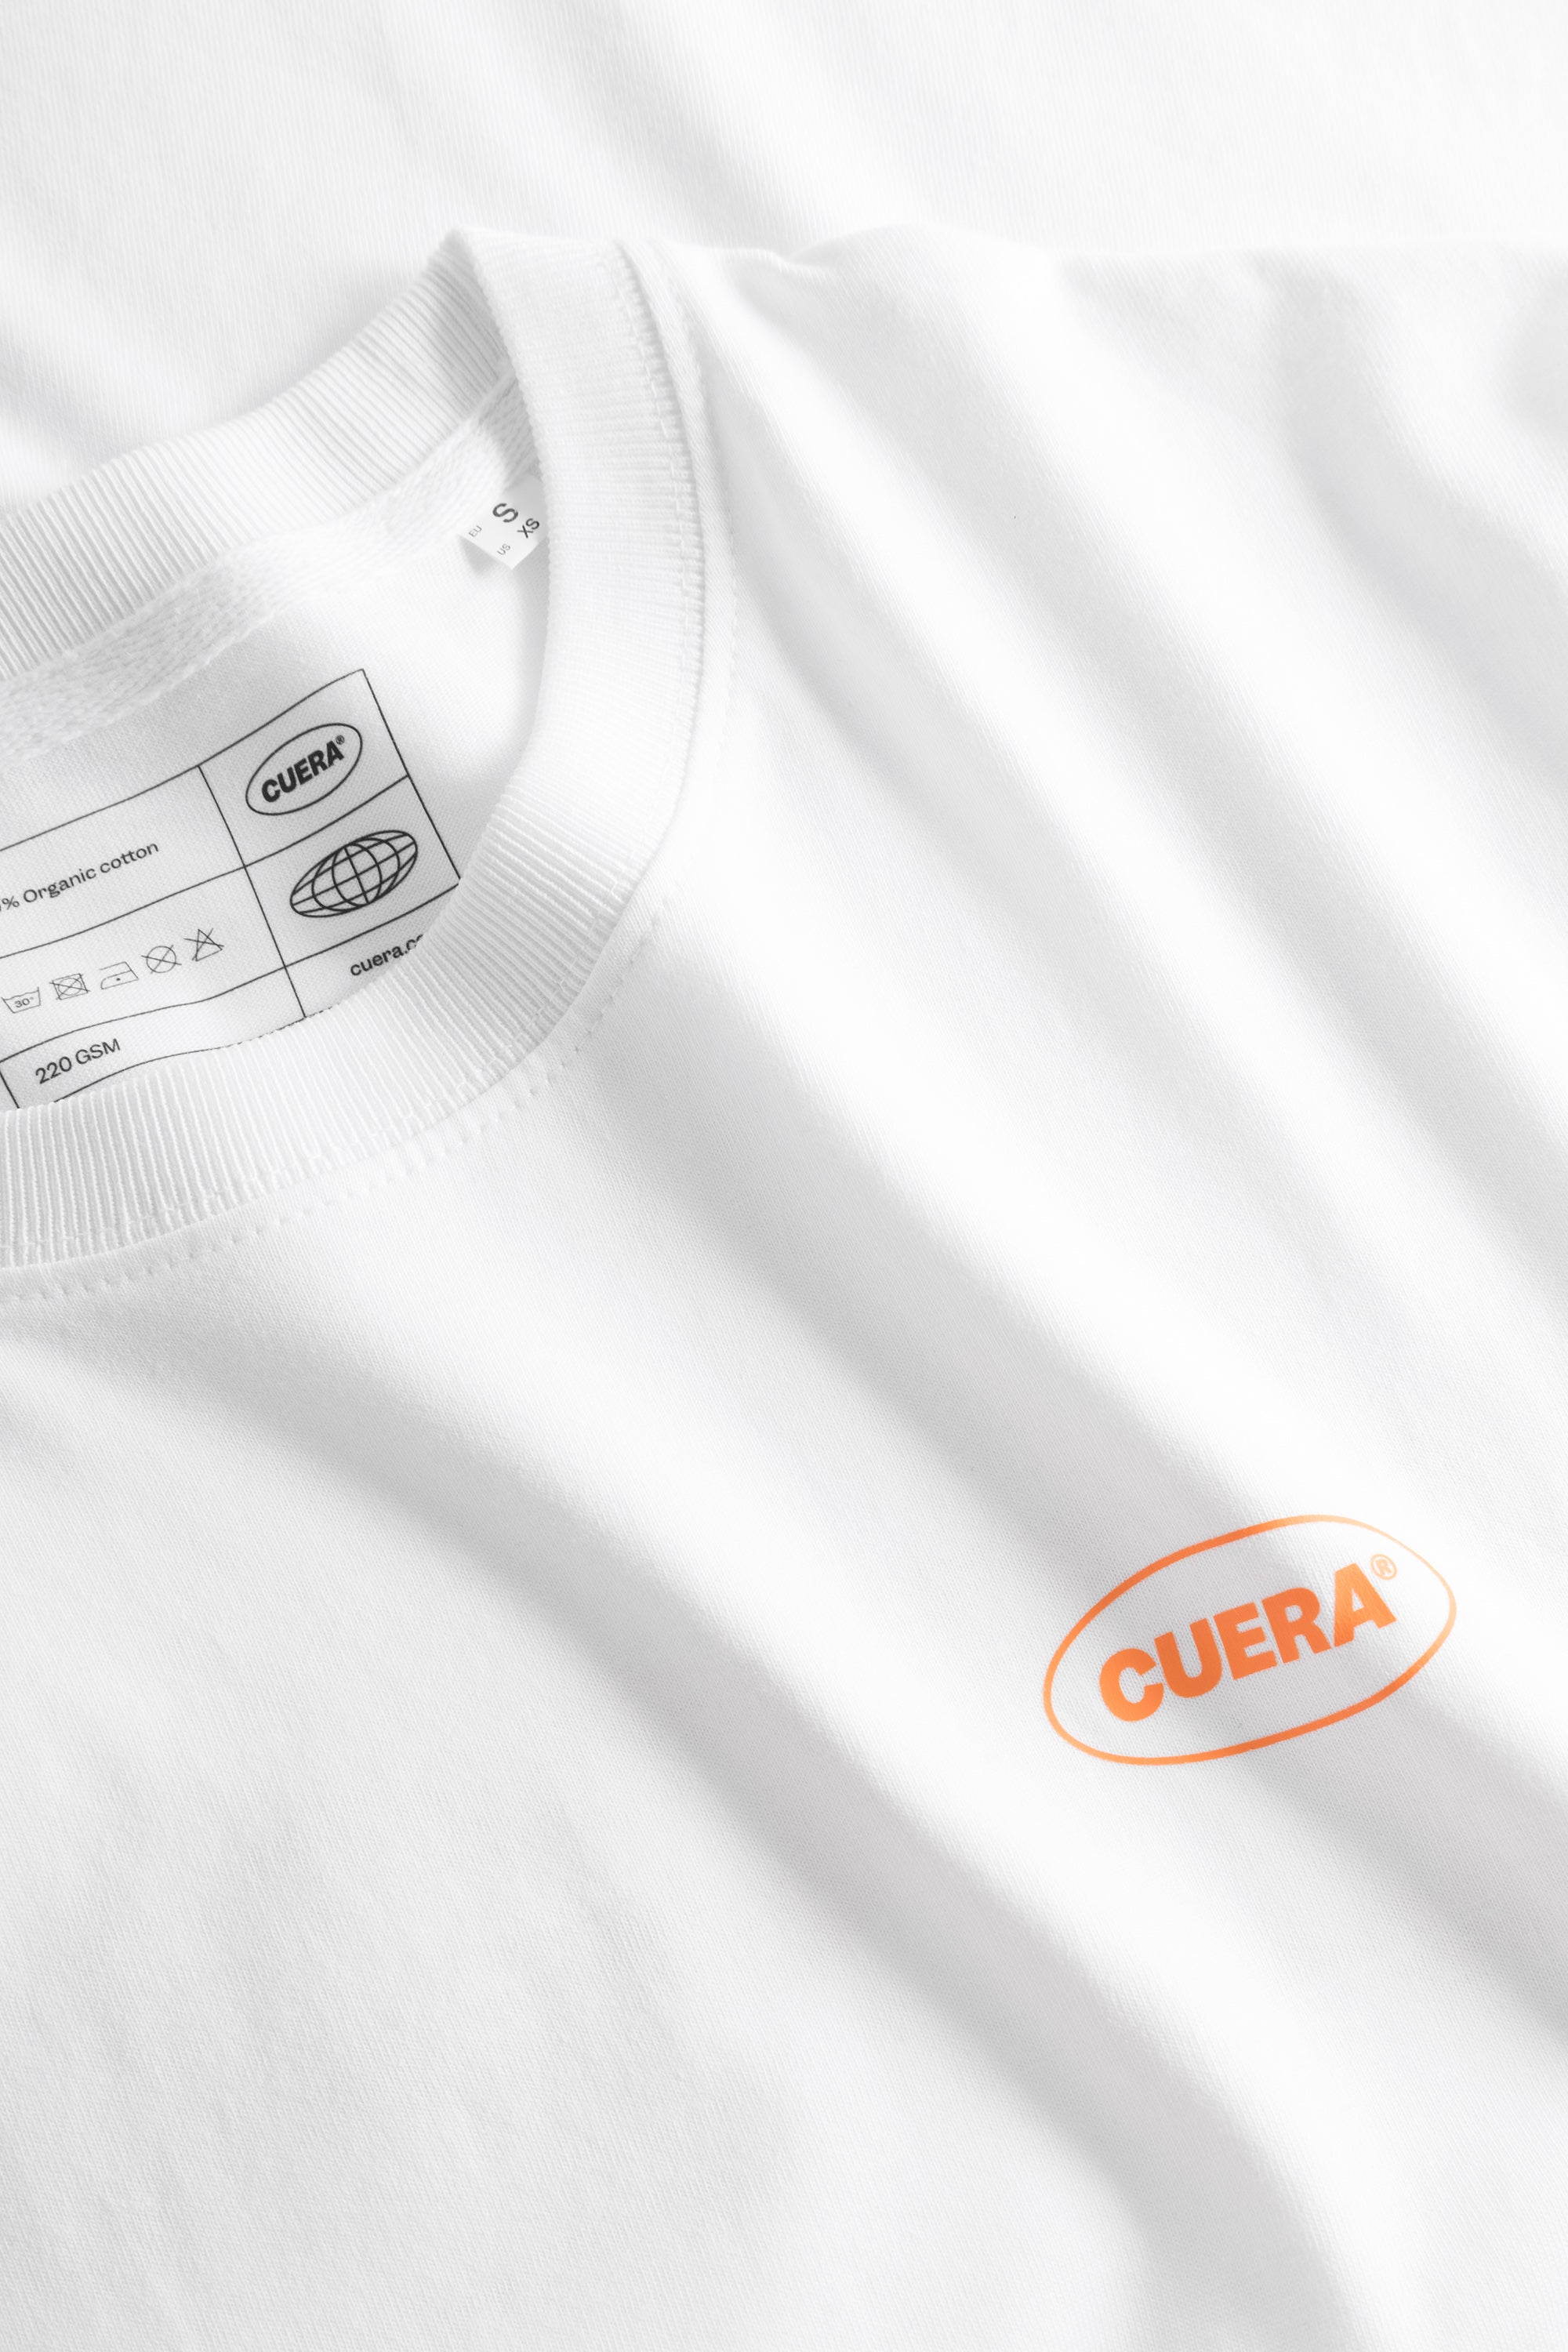 Cuera Relaxed Heavy offcourt T-shirt (White)